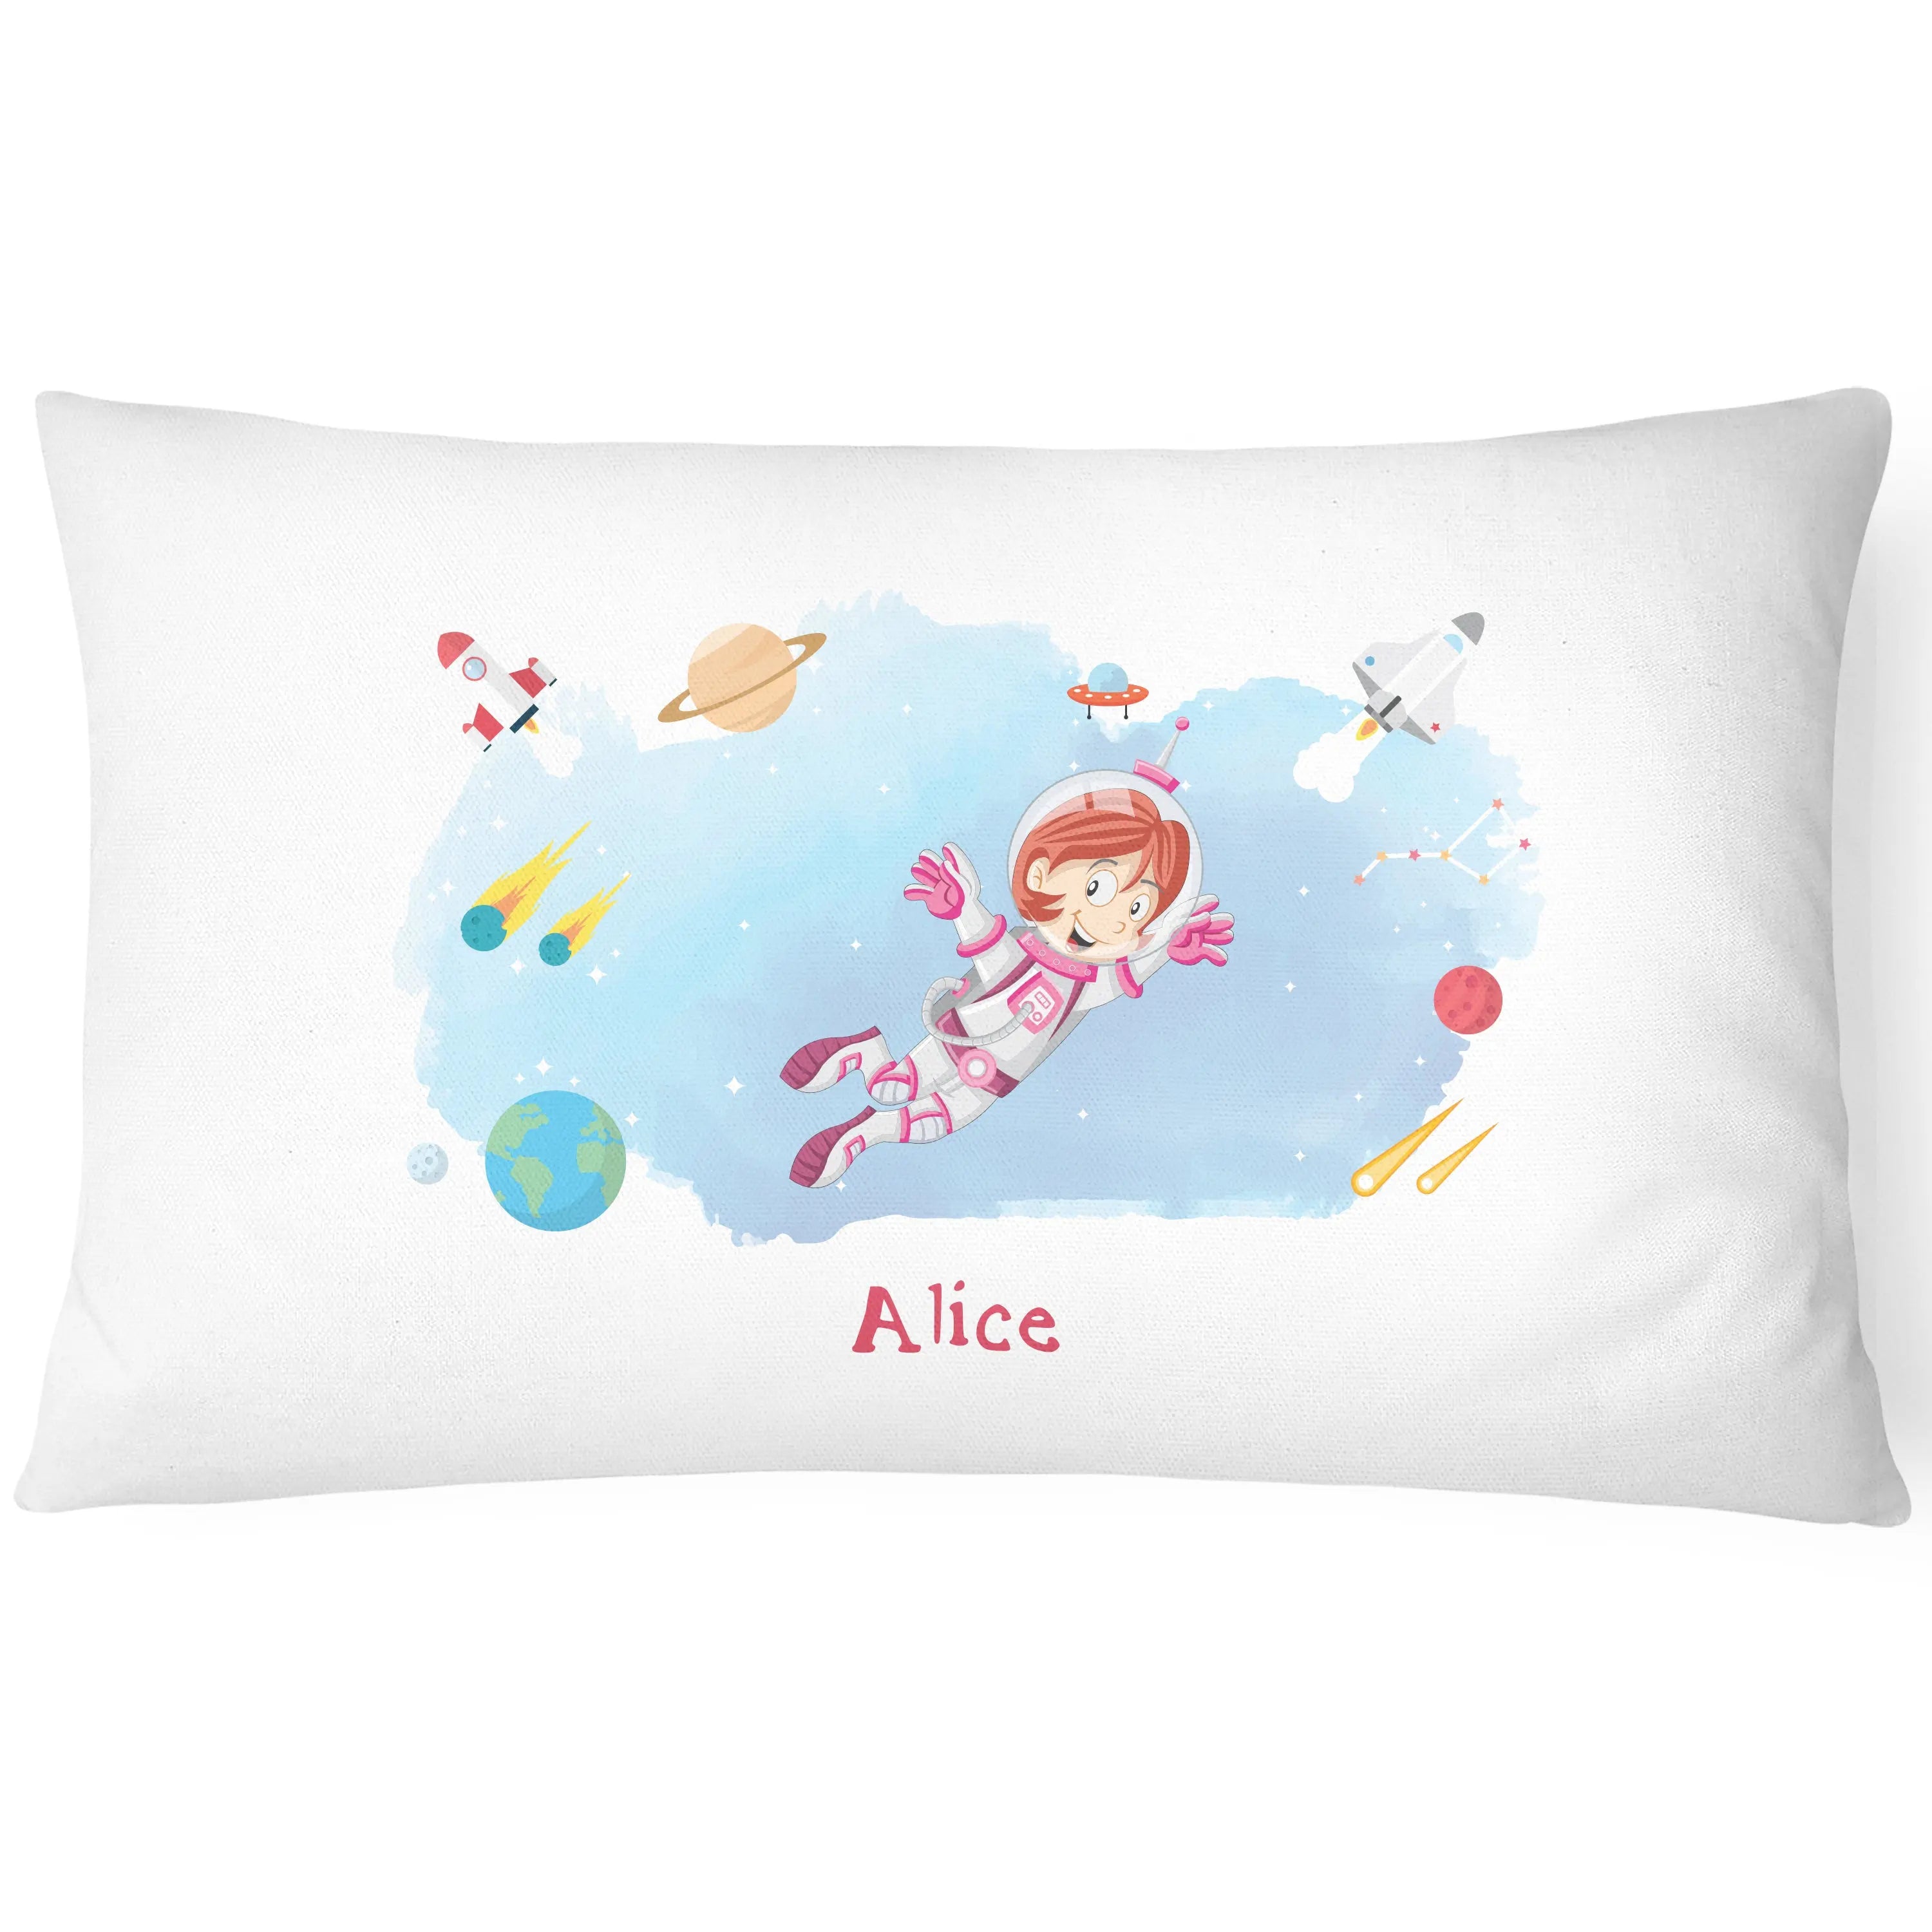 Space Pillowcase for Kids - Personalise With Any Name - Space Flight - CushionPop